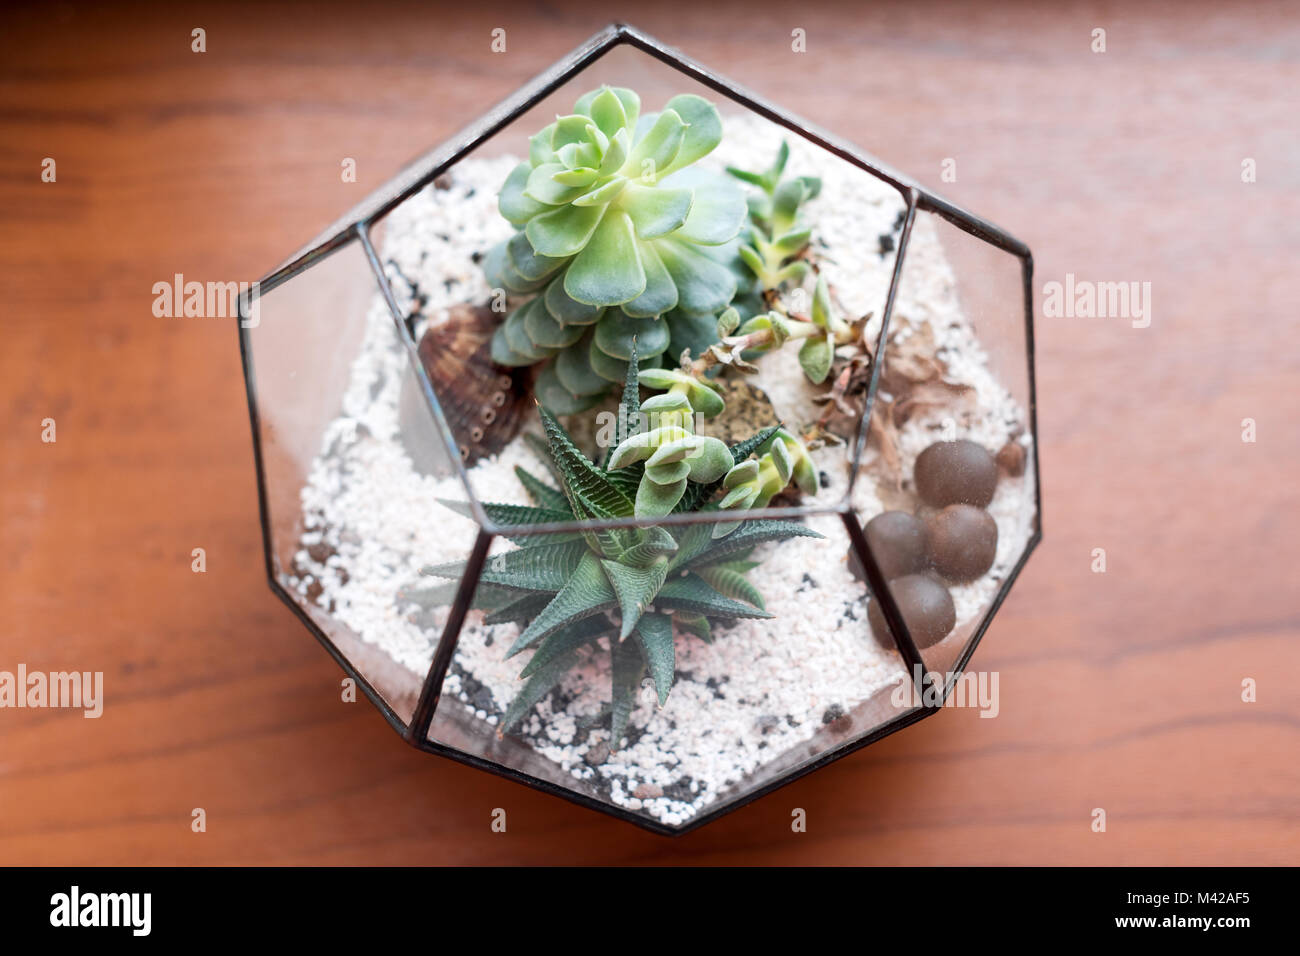 Mini succulent garden in glass terrarium on wooden windowsill. Succulents with sand and rocks in glass box. Home decoration elements Stock Photo